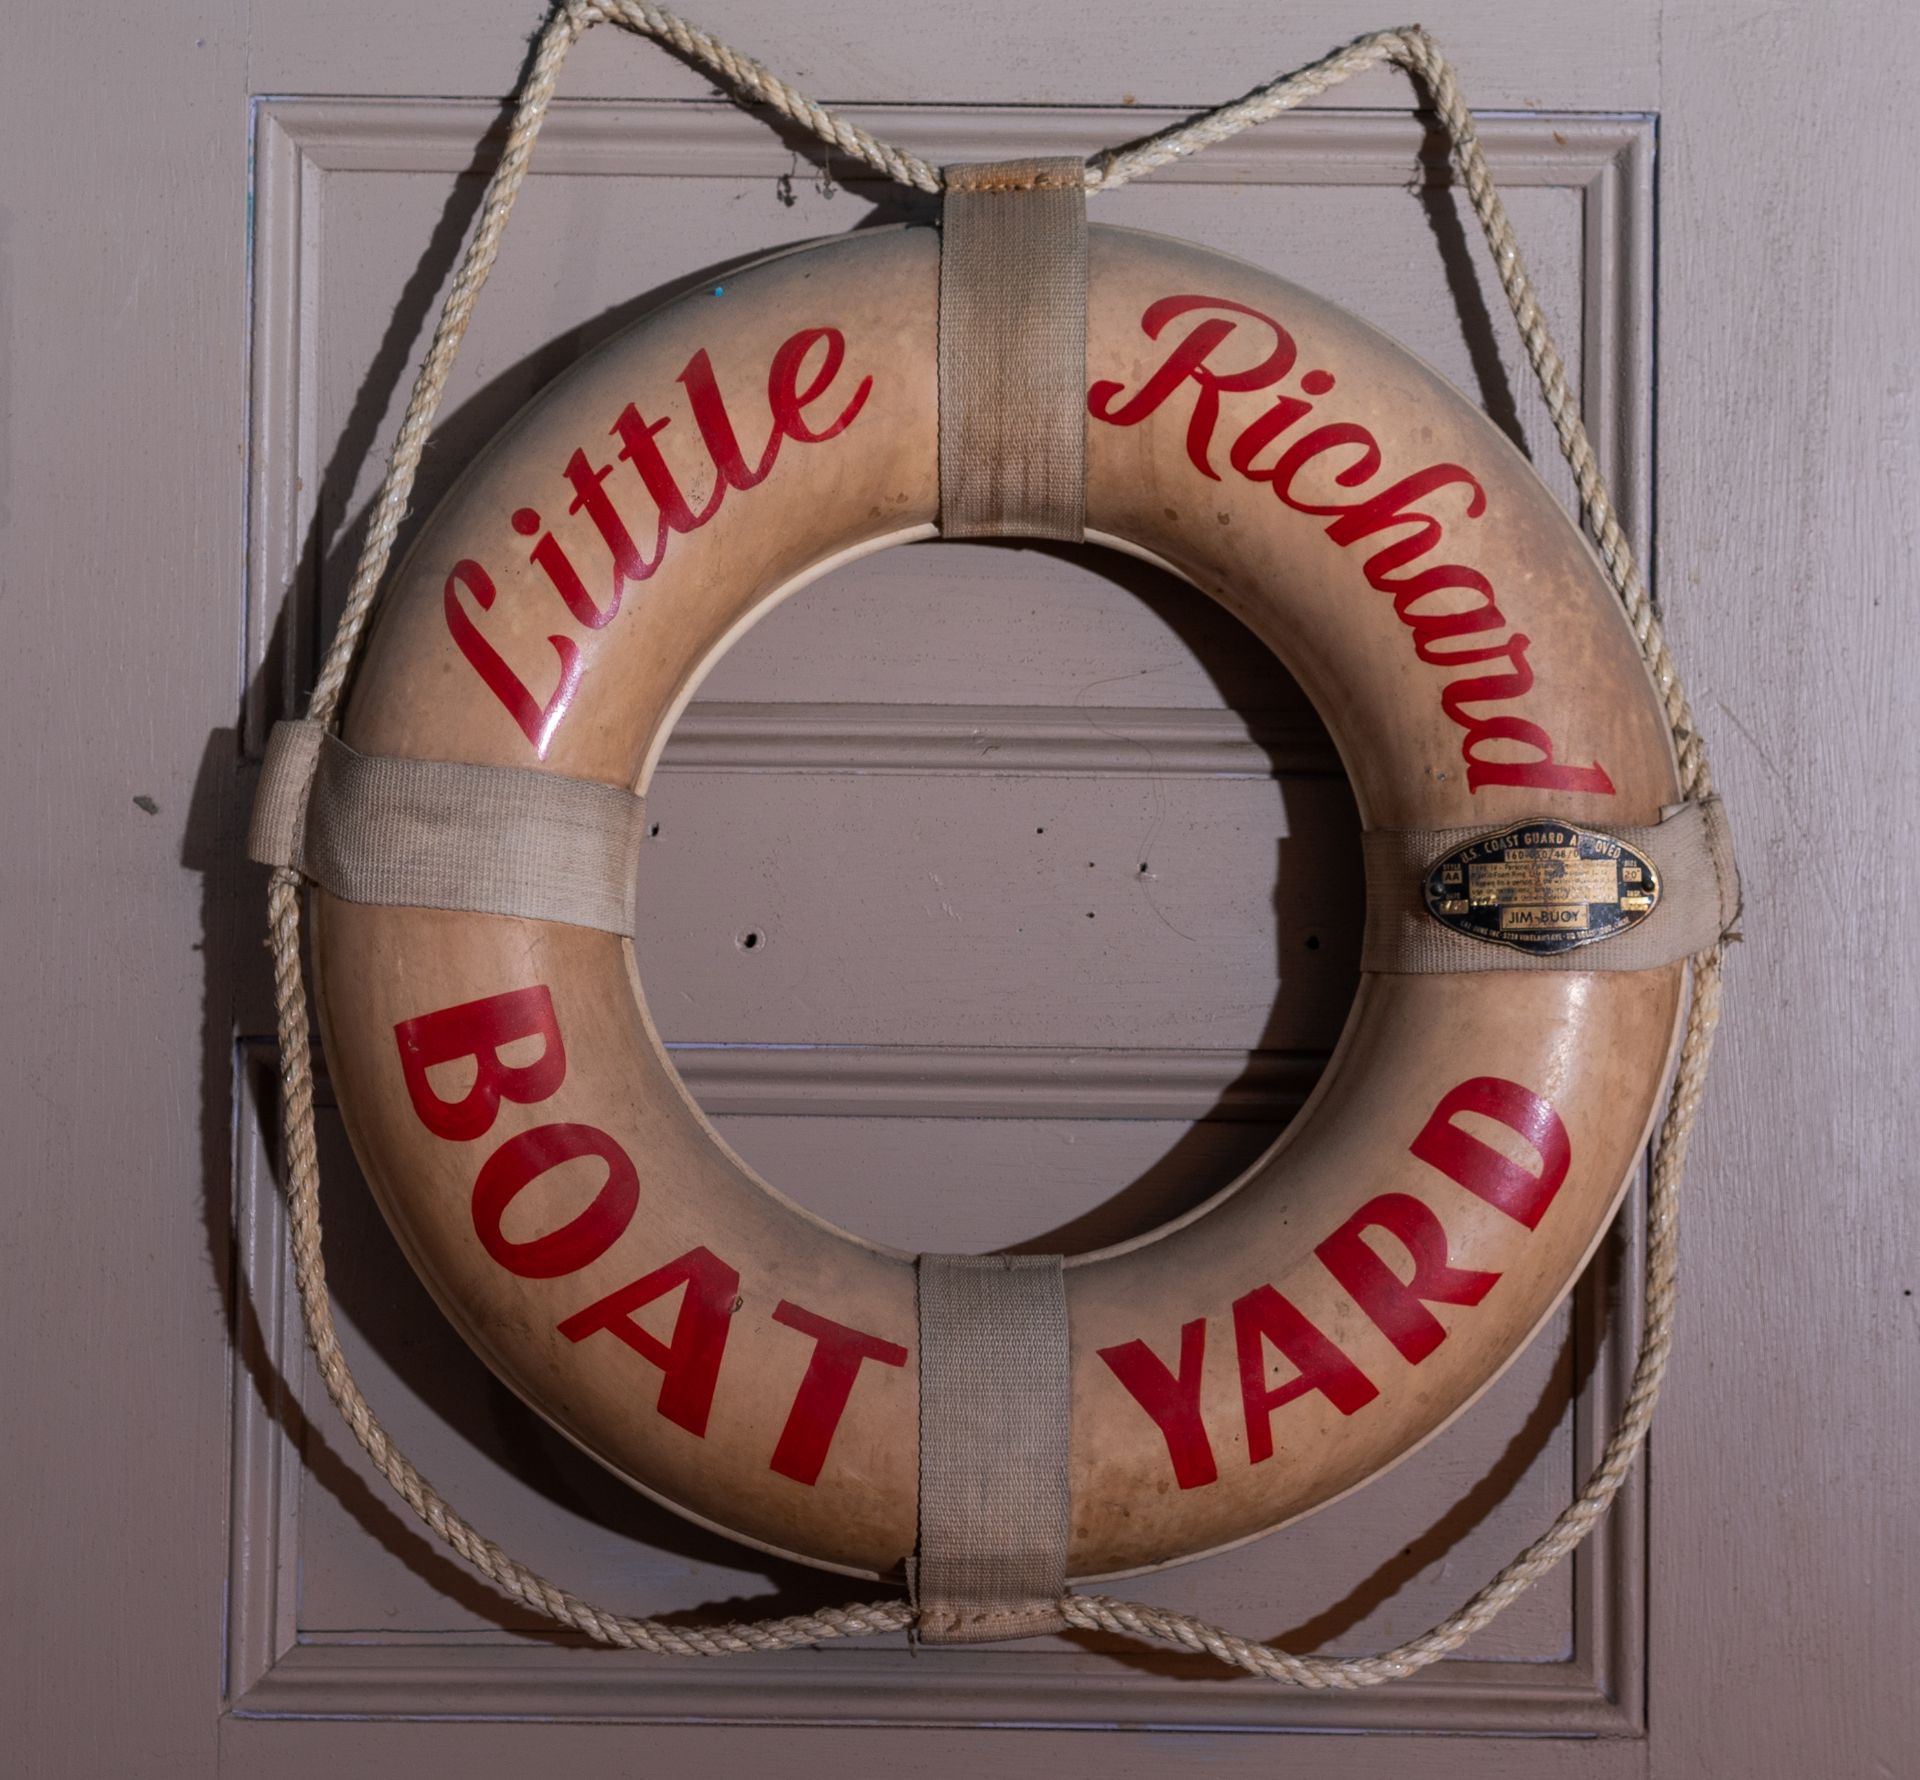 20" Gym Buoy Throwing Ring w/ Coat Guard Approved Label Little Richard Boat Yard